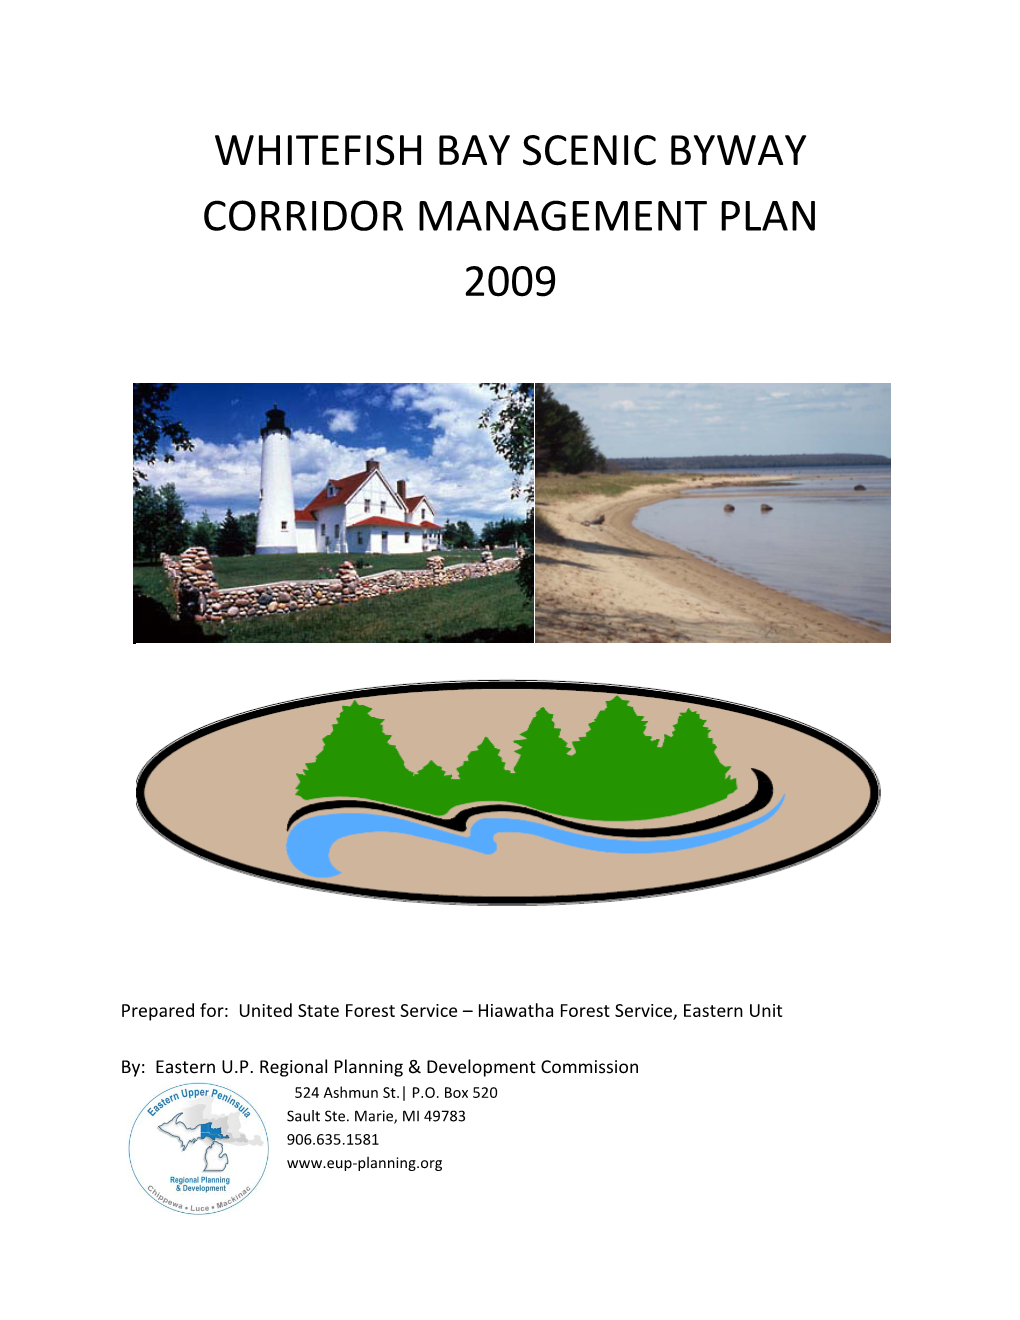 Whitefish Bay Scenic Byway Corridor Management Plan 2009